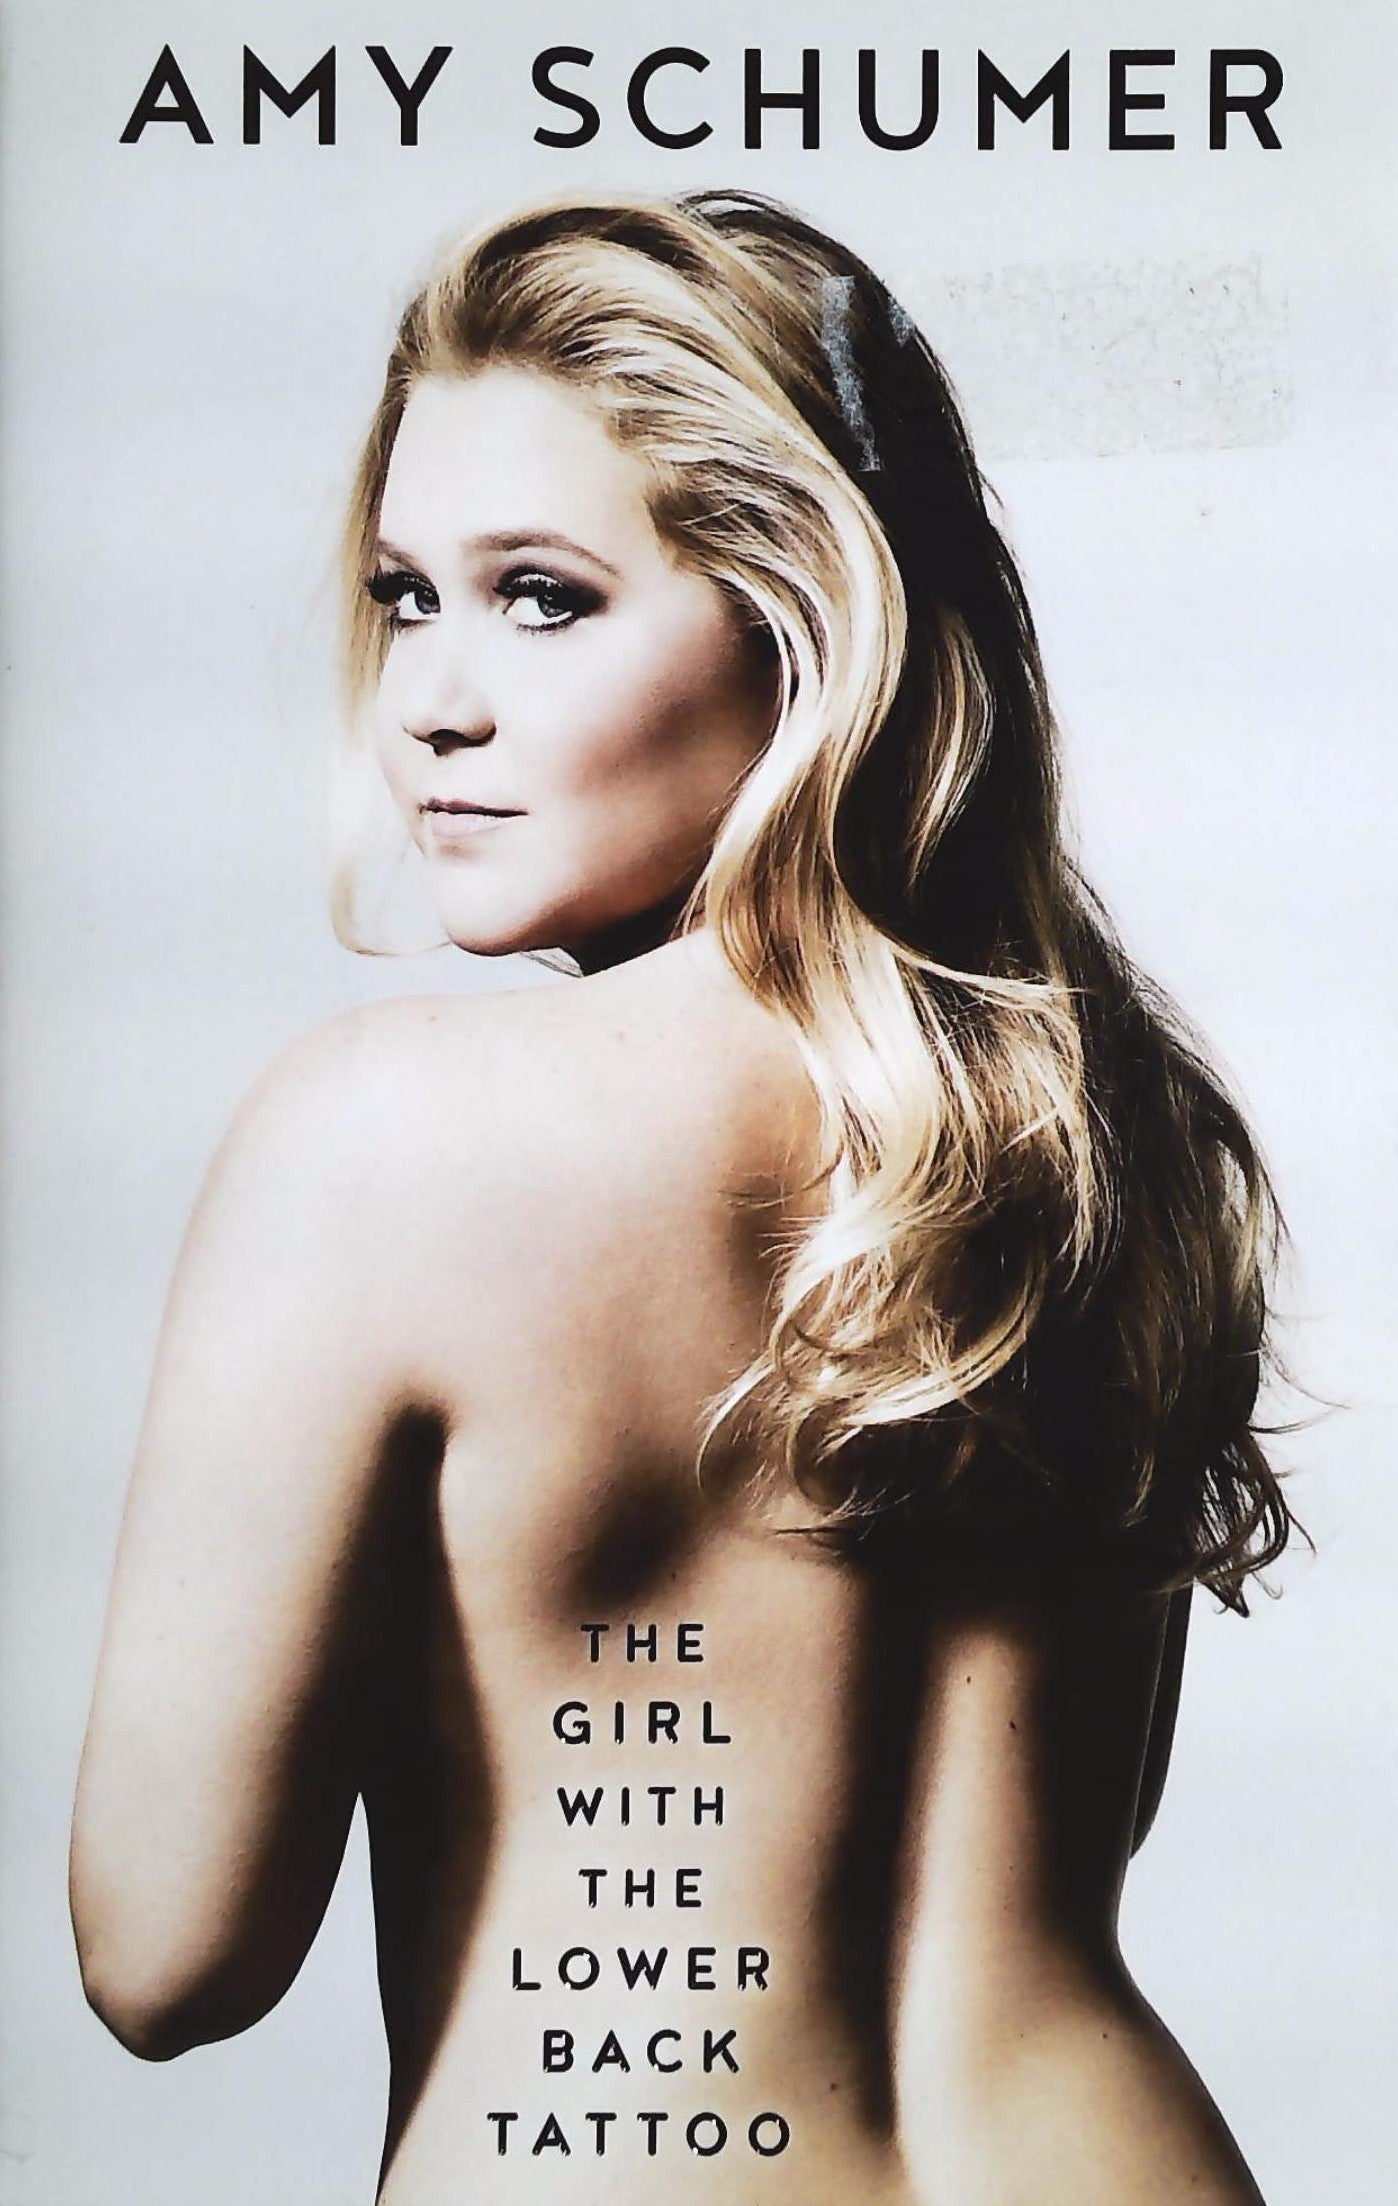 Livre ISBN 1501139886 The Girl With the Lower Back Tattoo (Amy Schumer)